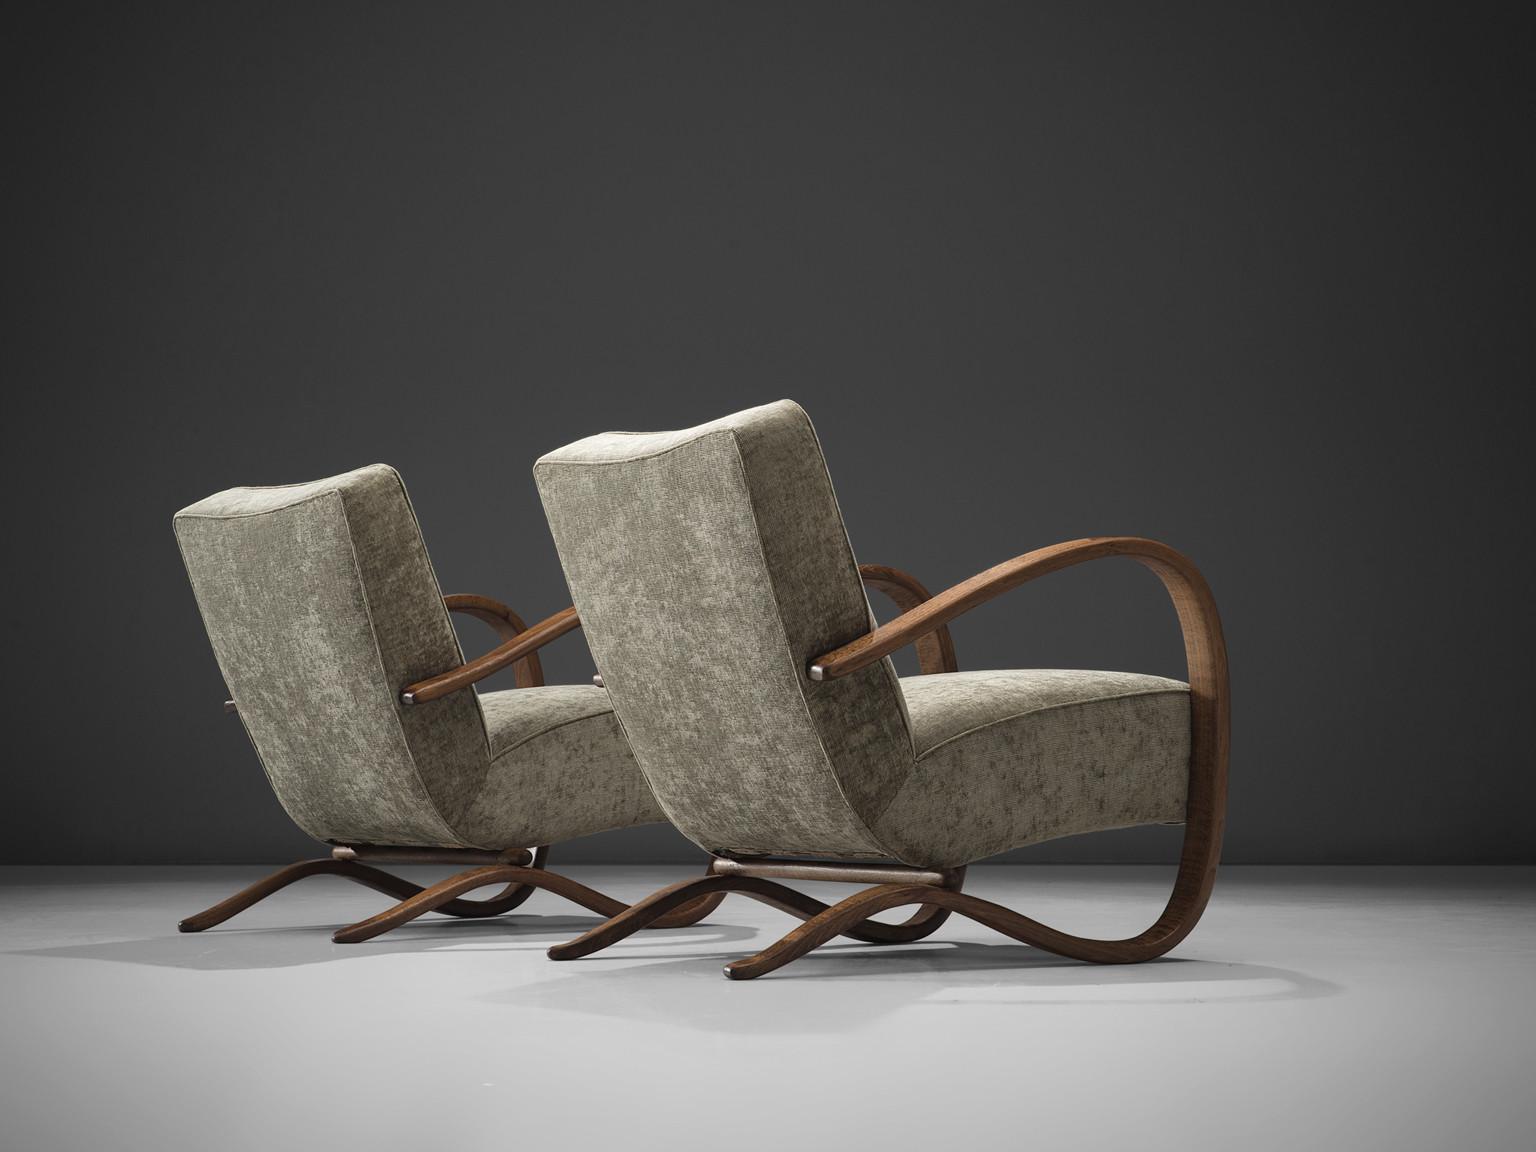 Set of Halabala Lounge Chairs for L.

Please note the upholstery in the imagery is not leading, just as a reference.